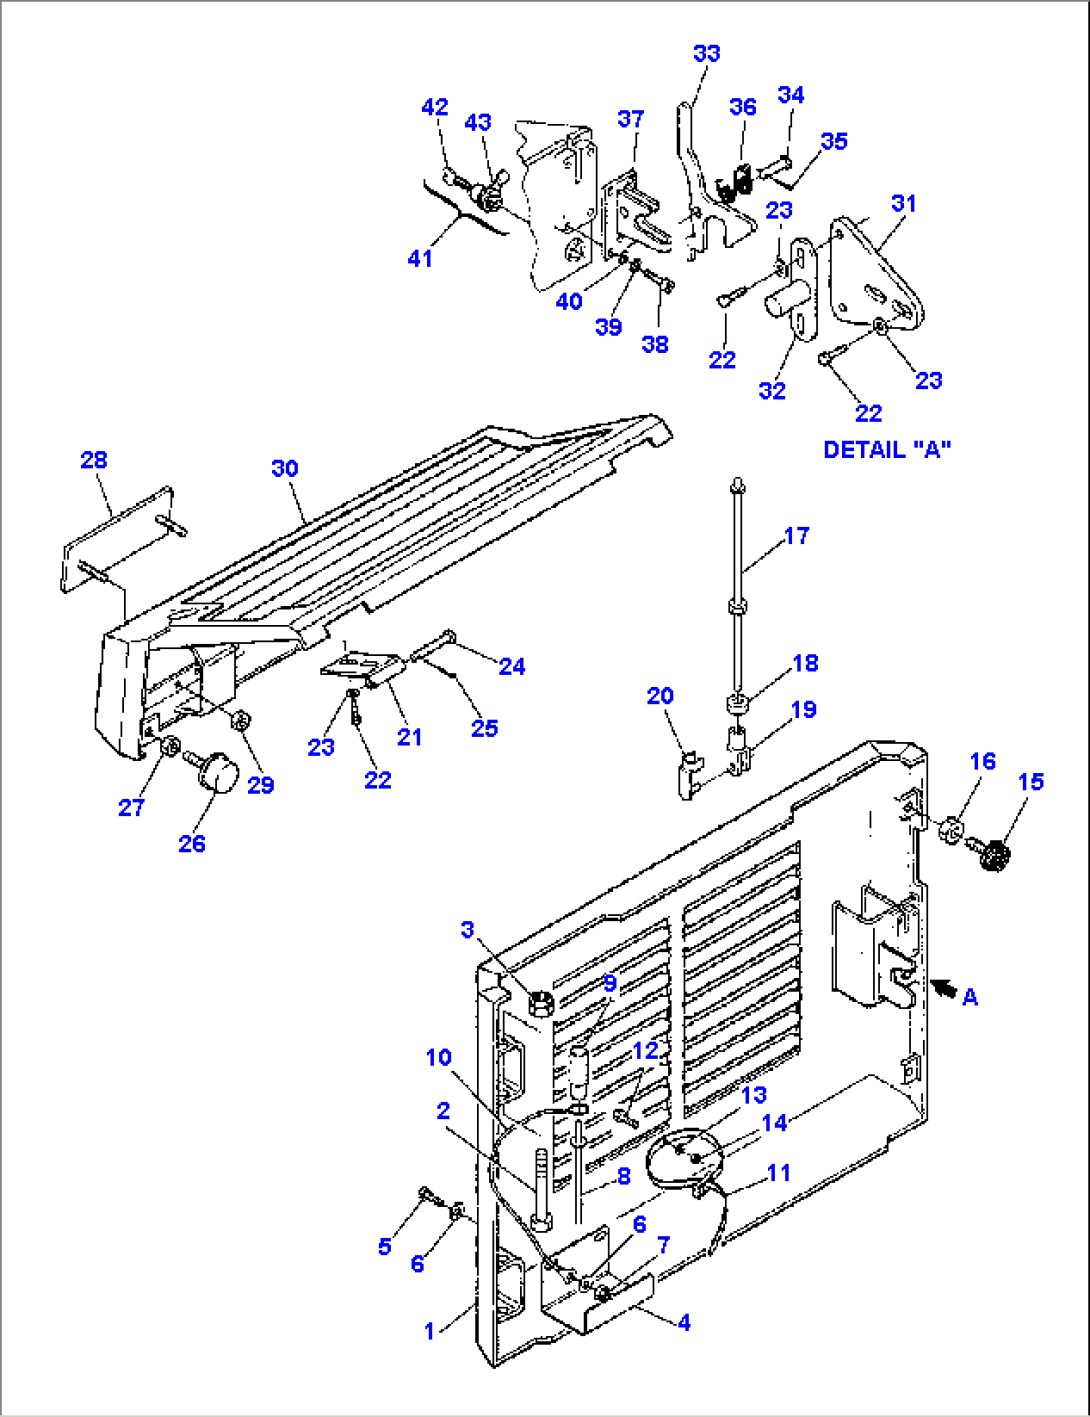 ENGINE SIDE COVER